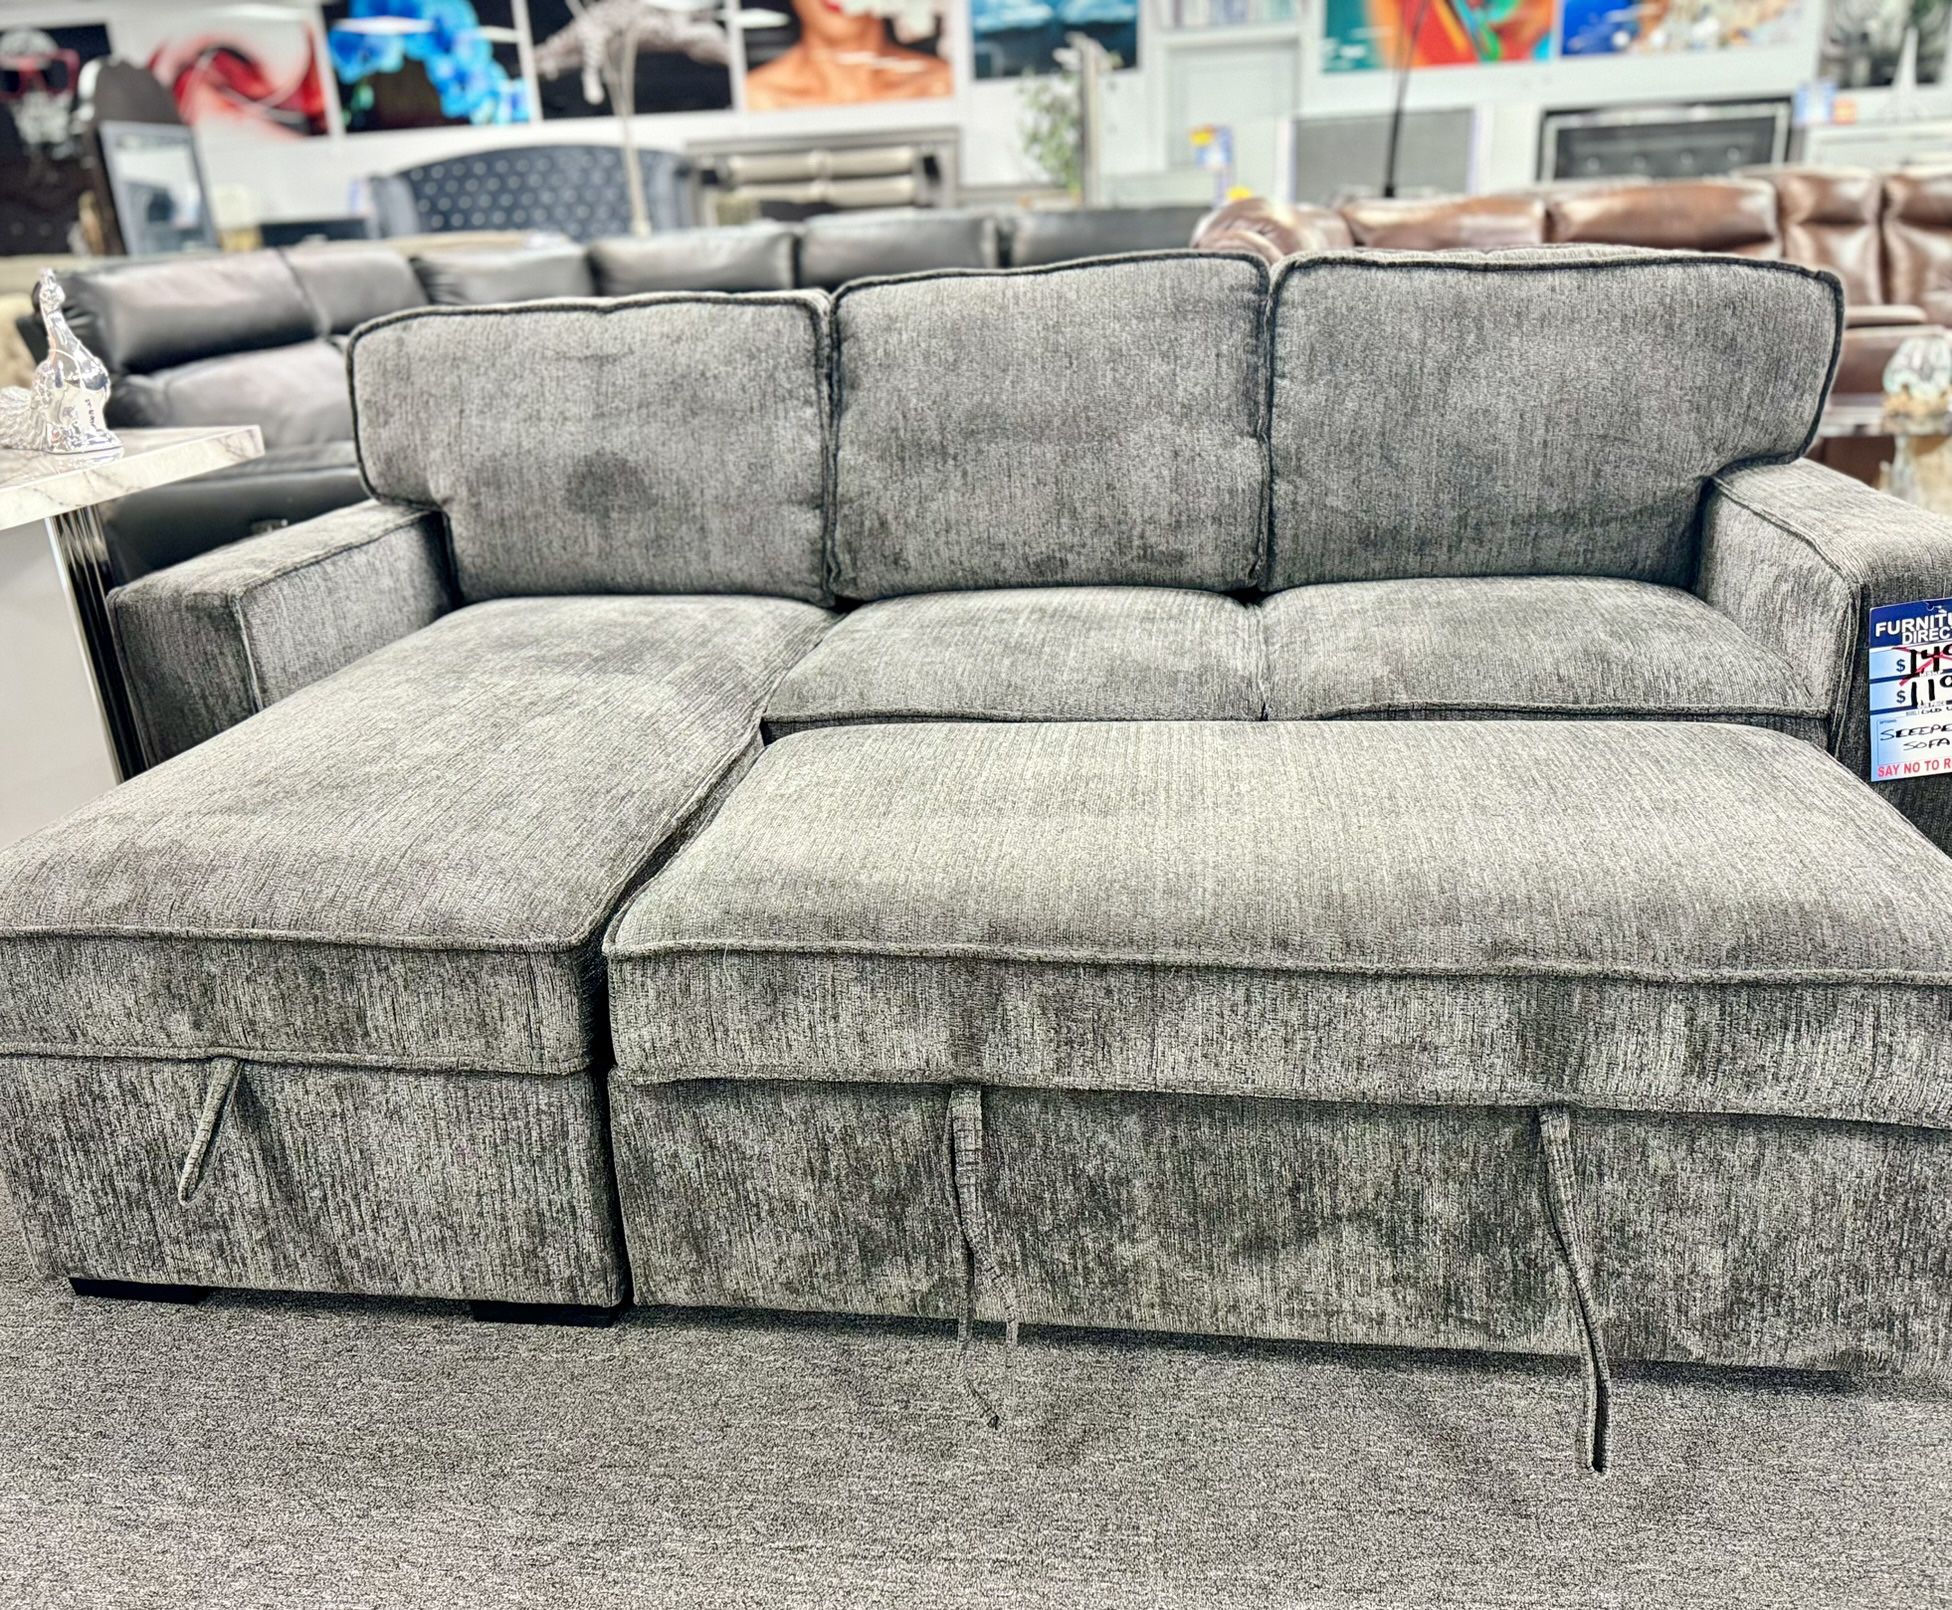 Amazing Offer🐣Easter Deal Gorgeous Grey Pull Out Sleeper Sectional Available $599 (Huge Saving) Amazing Offer🐣Easter Deal Gorgeous Grey Pull Out Sle